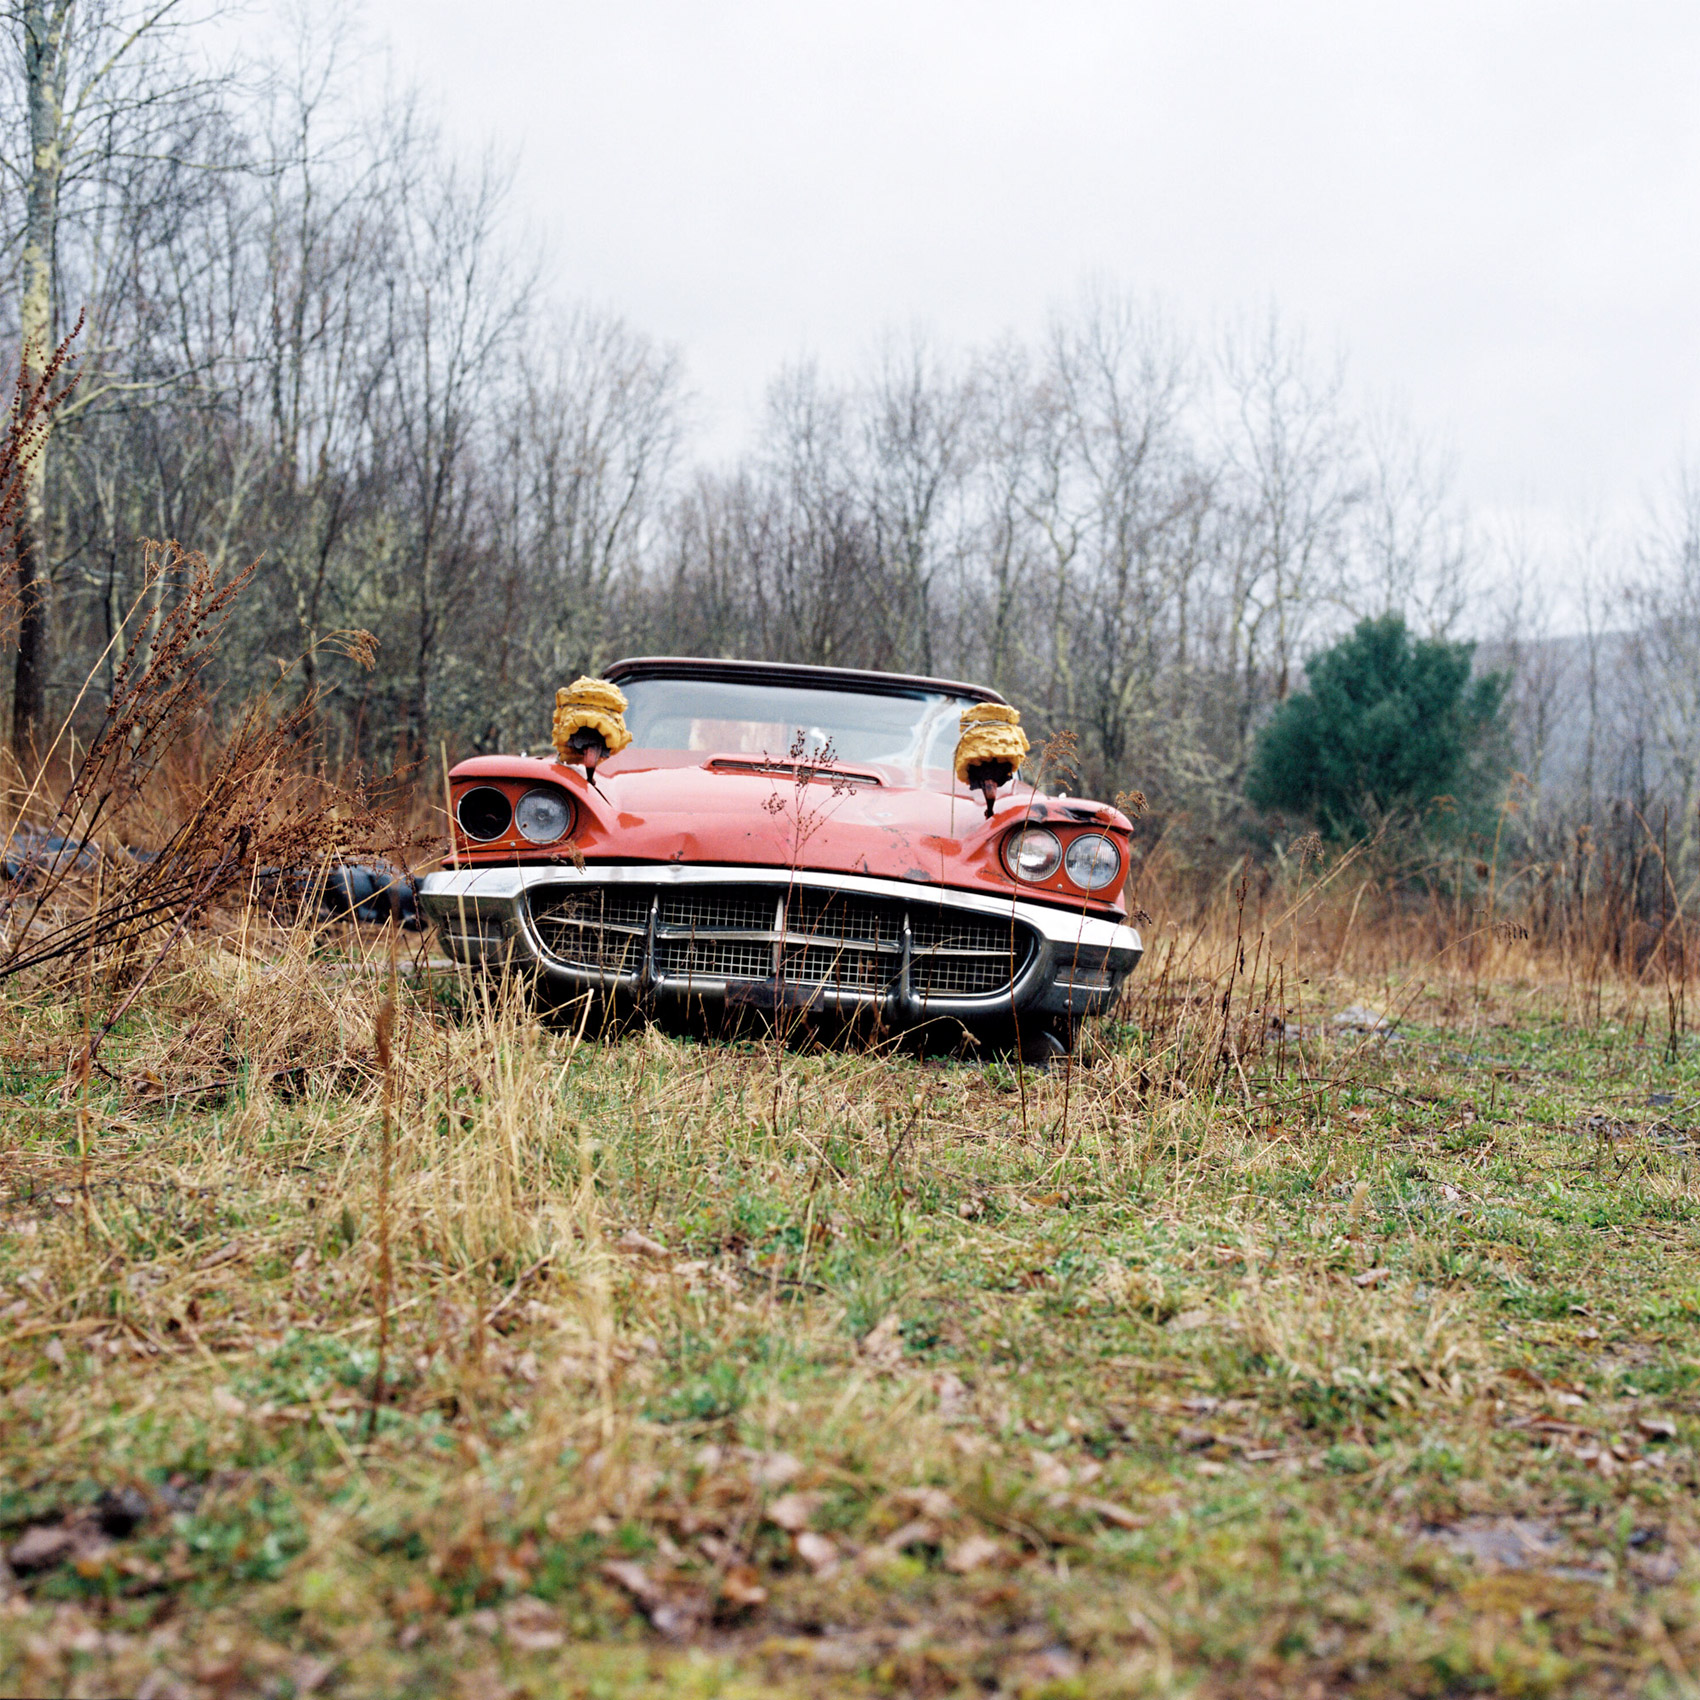 CAR_A-VINTAGE-CAR-SITS-ROTTING-IN-A-FIELD-IN-UPSTATE-NEW-YORK-ON-A-DRIZZLY-COLD-DAY